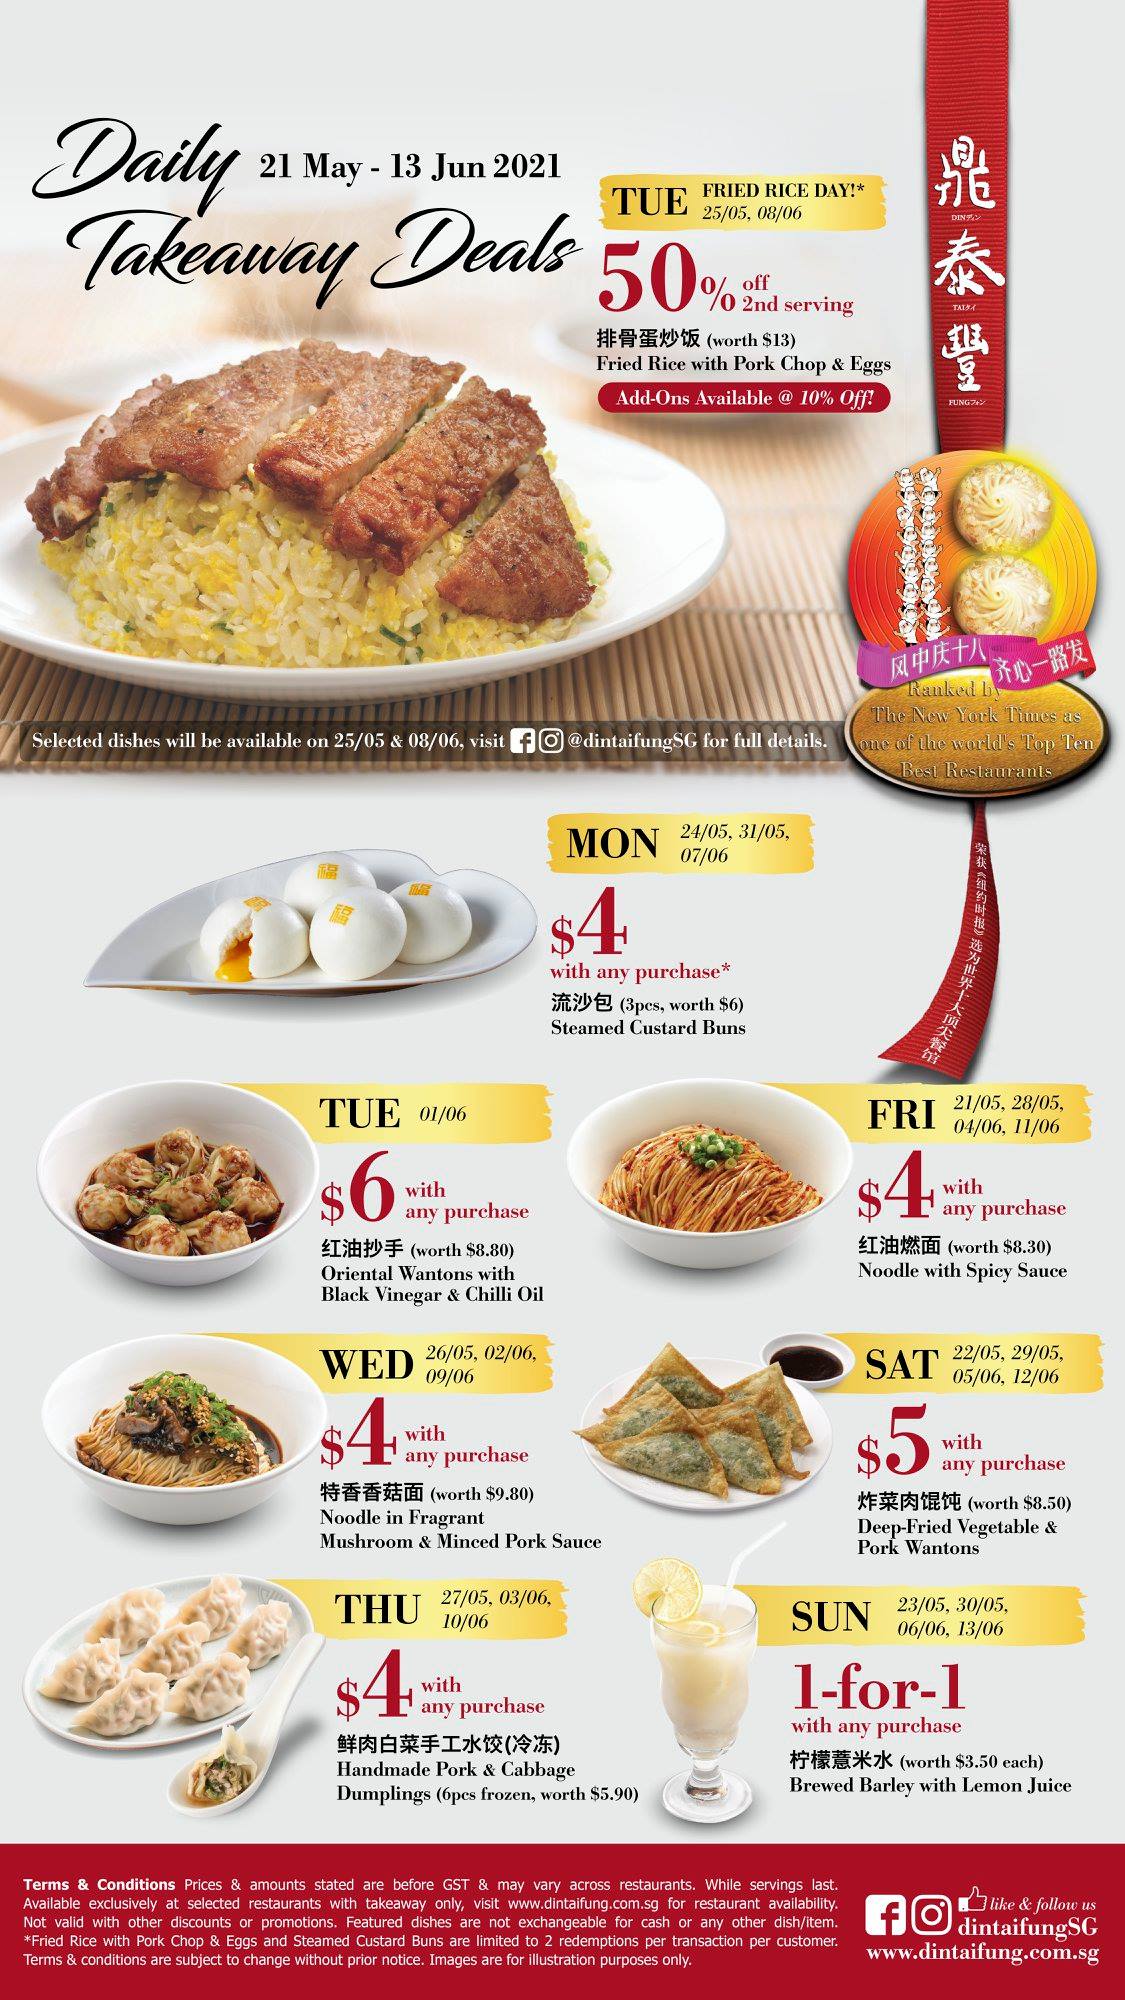 Din Tai Fung Offers Daily Takeaway Deals Including 50% Off 2nd Fried ...